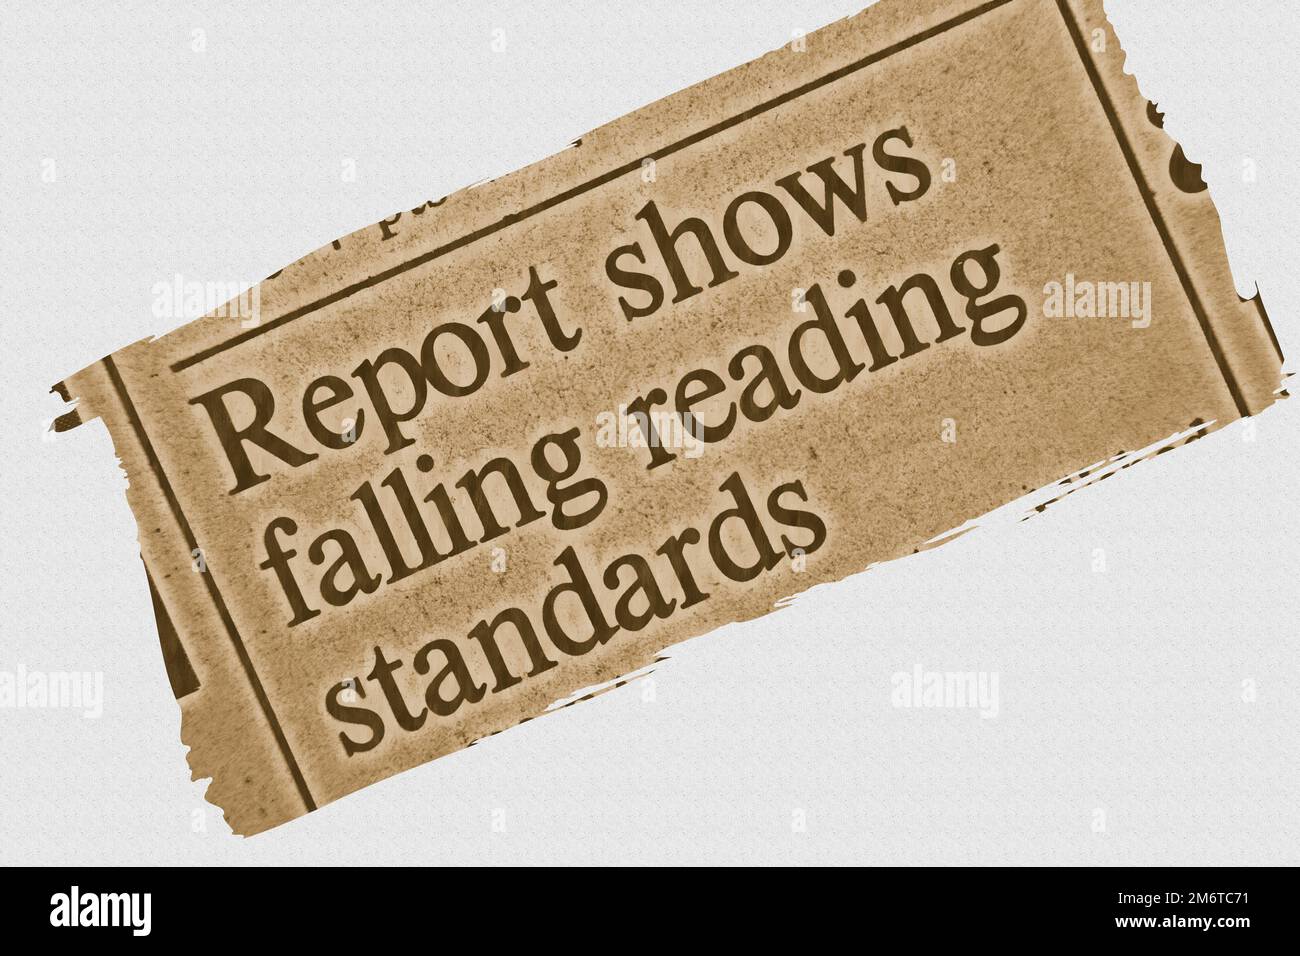 Report shows falling reading standards - news story from 1975 newspaper headline article title with highlight sepia overlay Stock Photo